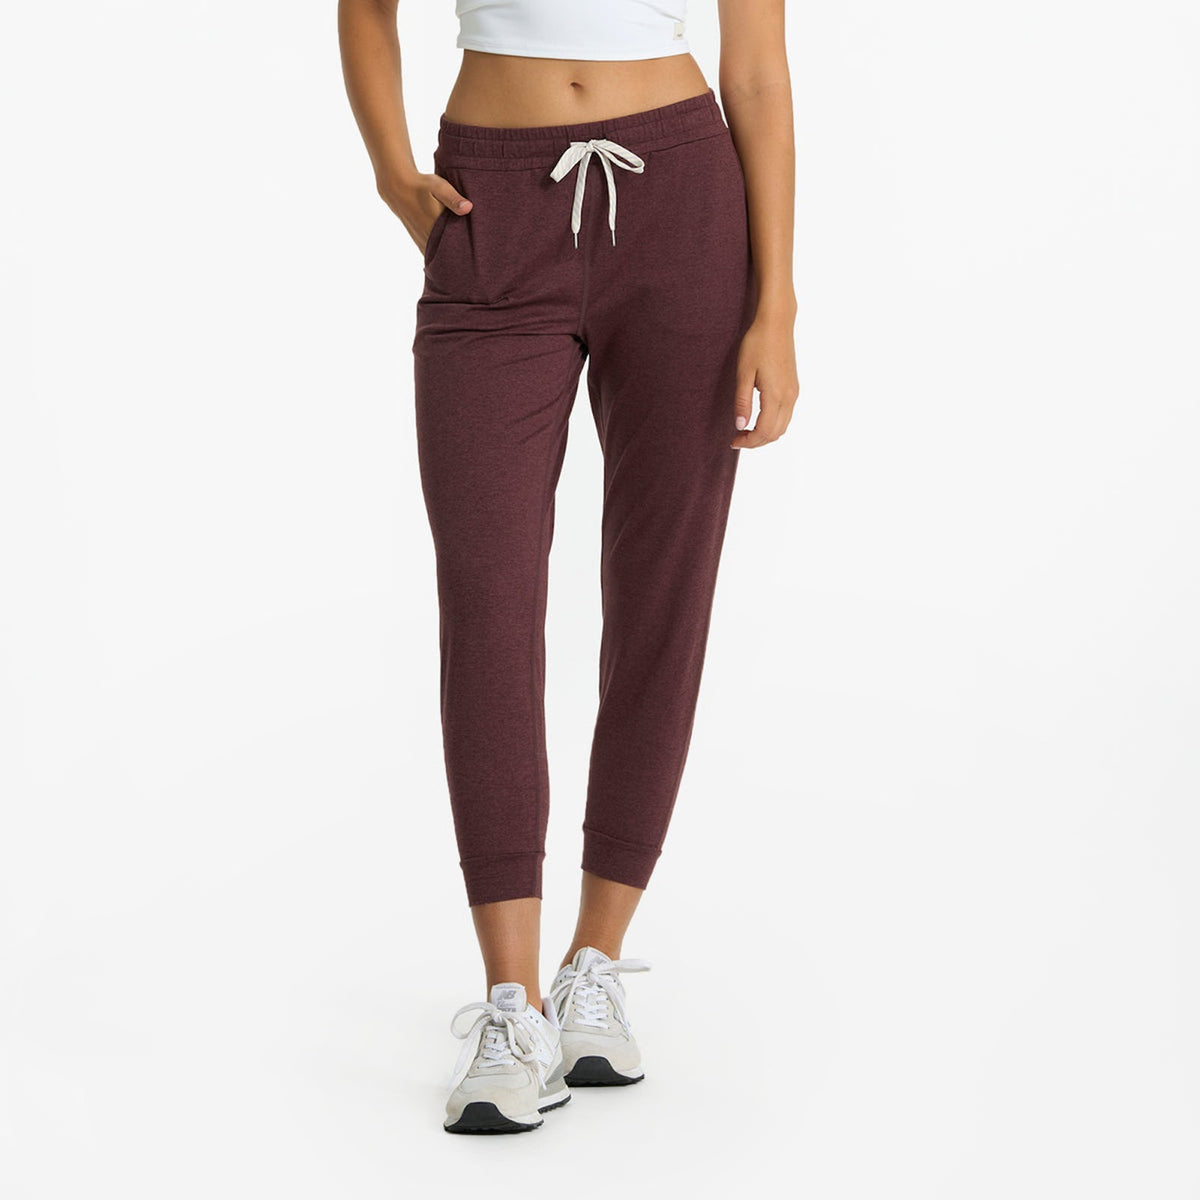 These Costco Joggers are only $12.99 versus $98 at Vuori. I love the q, joggers